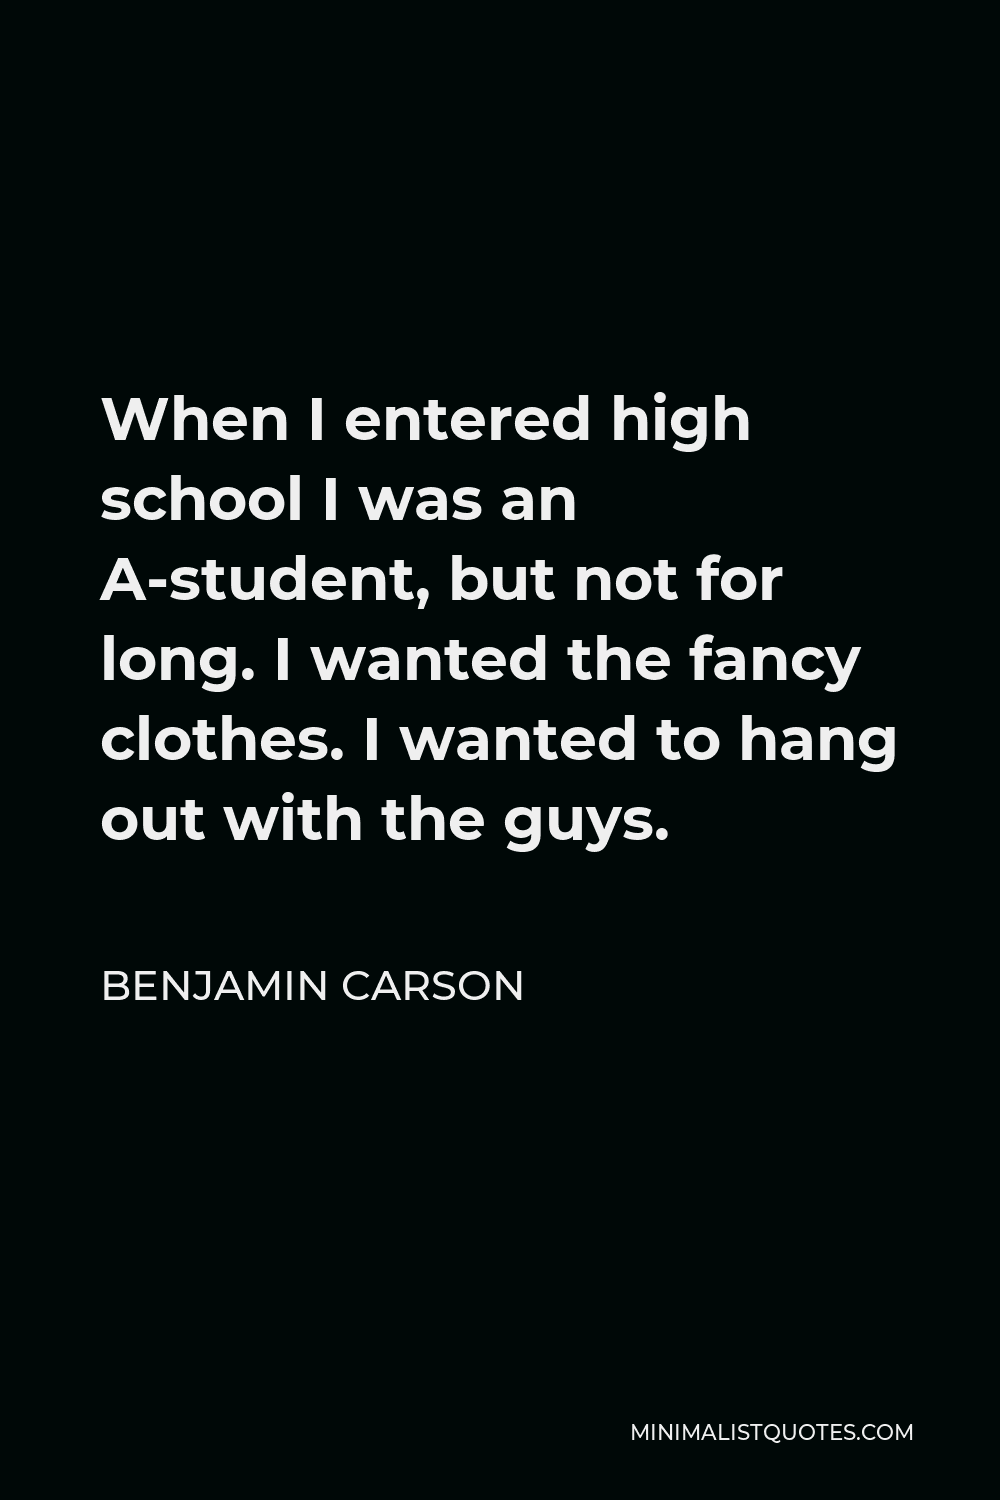 Benjamin Carson Quote - When I entered high school I was an A-student, but not for long. I wanted the fancy clothes. I wanted to hang out with the guys.